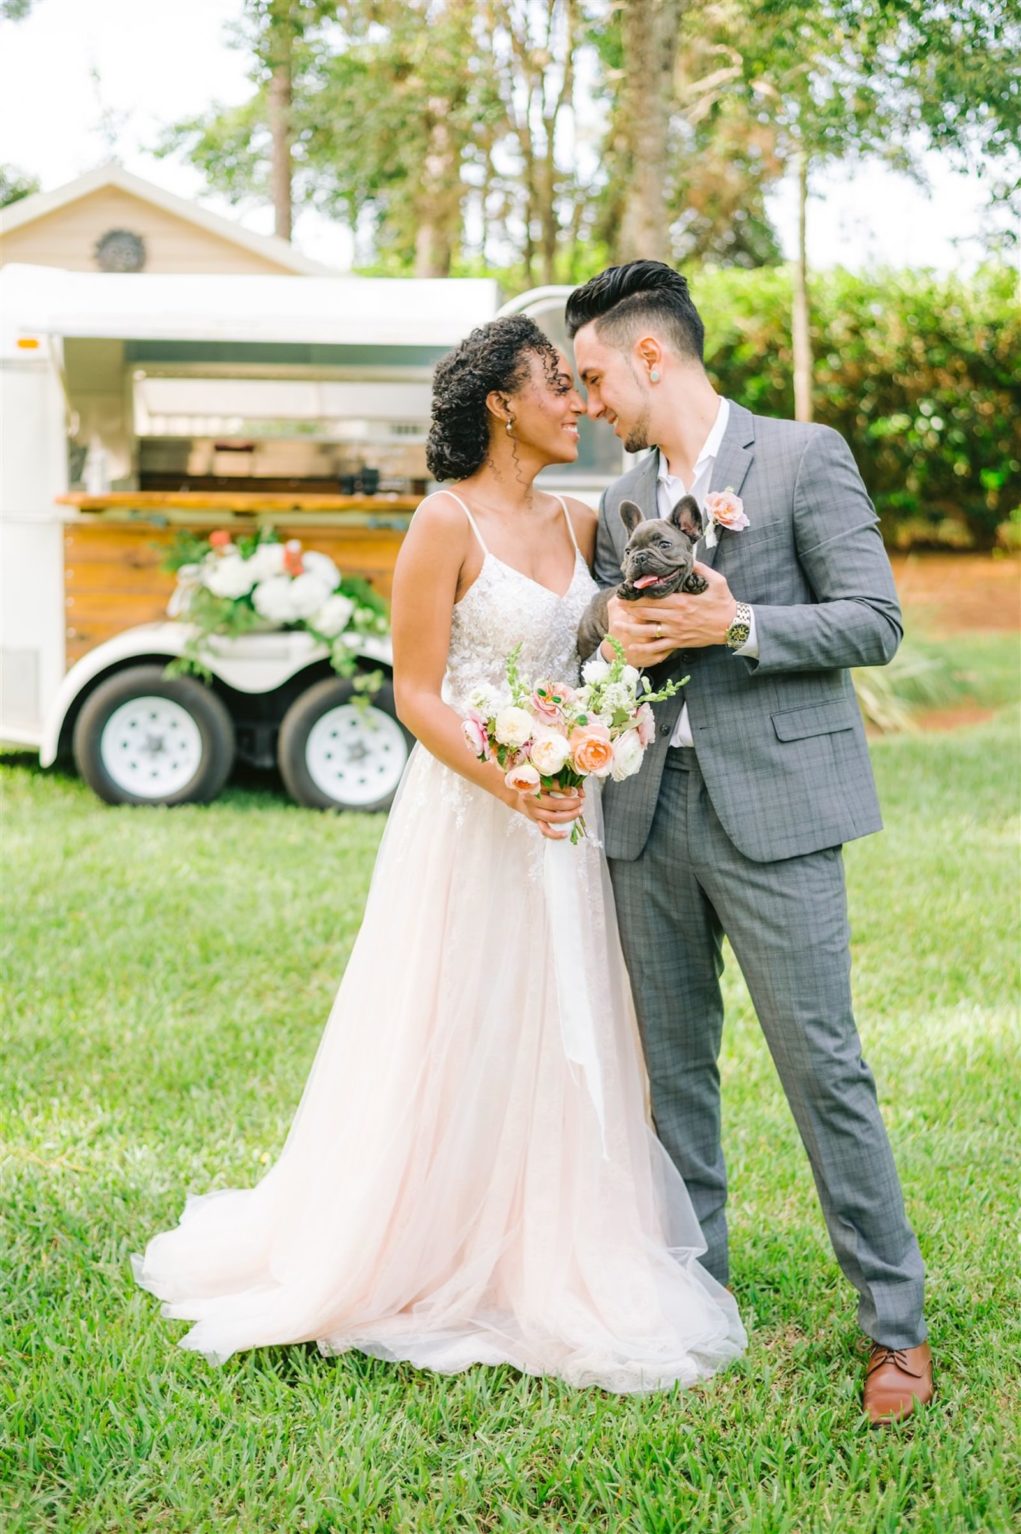 Tampa Bay Bride and Groom Romantic Private Residence Backyard Intimate Wedding, Holding Bridal Bouquet with Triadic Color Scheme, pink, peach and ivory florals, Wearing A Line Spaghetti Strap Wedding Dress with Lace Bodice and Blush Tulle Skirt, Groom in Stylish Gray Plaid Suite, Holding Adoptable Pet Pitbull Puppy | Tampa Wedding Attire Nikki’s Glitz and Glam Bridal Boutique | Tampa Bay Wedding Planner, Designer, Florist John Campbell Weddings | Private Bartending Service Spunky Spirits | Florida Hair and Makeup Artist Michele Renee The Studio | Styled Shoot